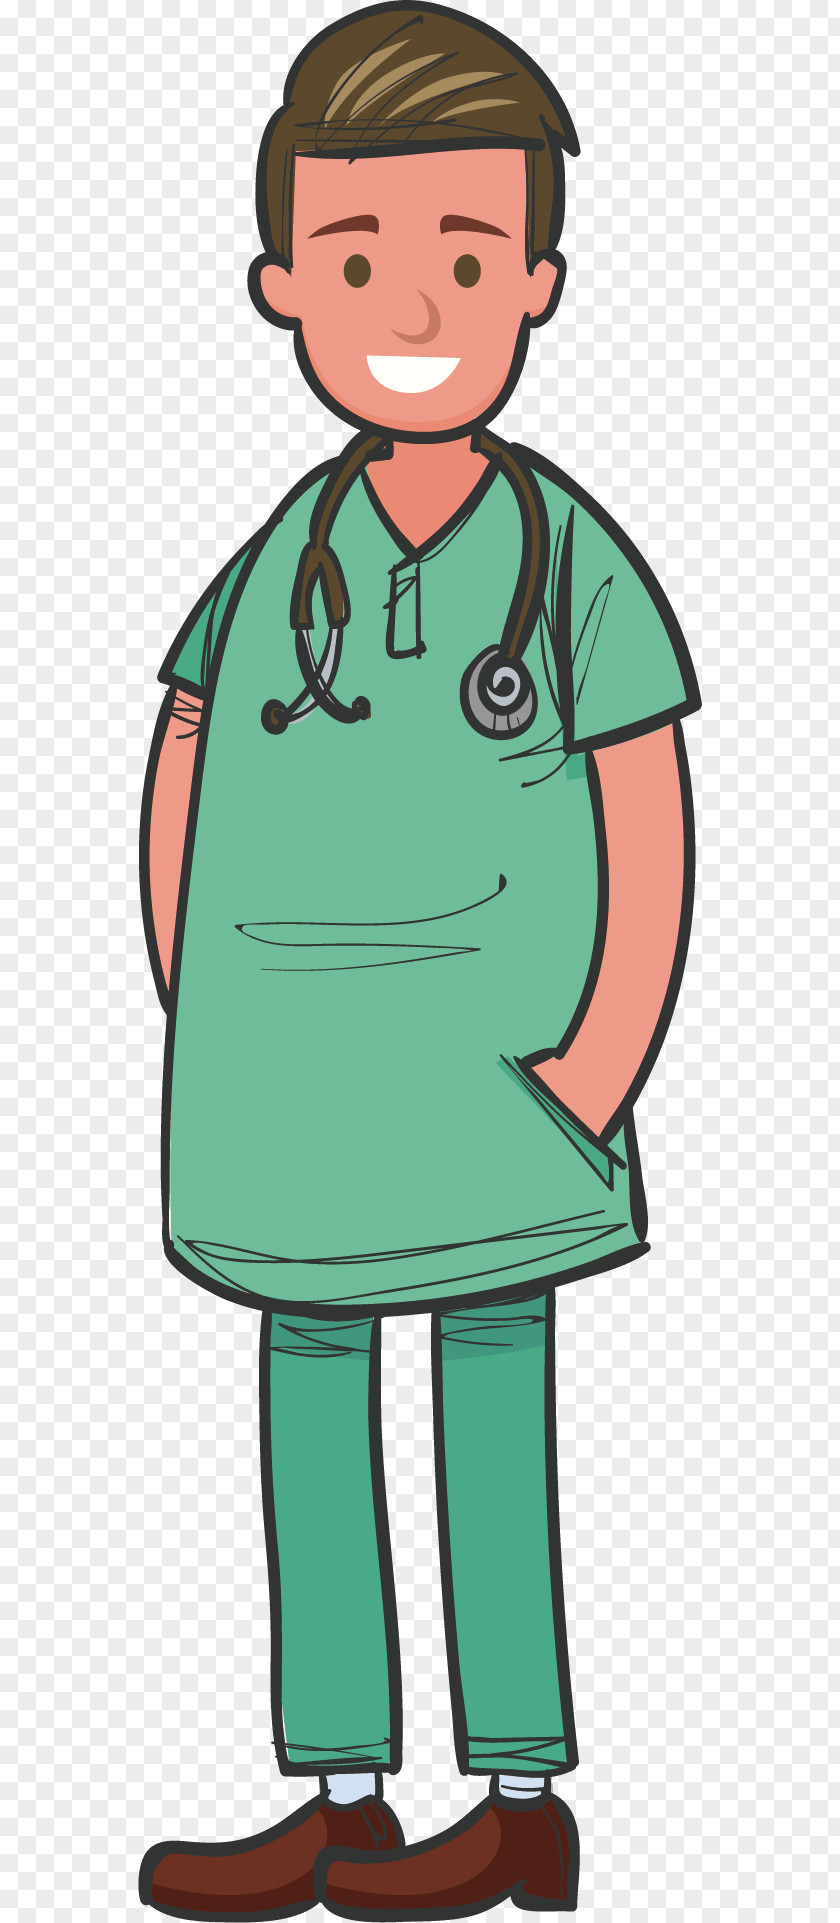 Operation Room Doctor Physician Cartoon Clip Art PNG